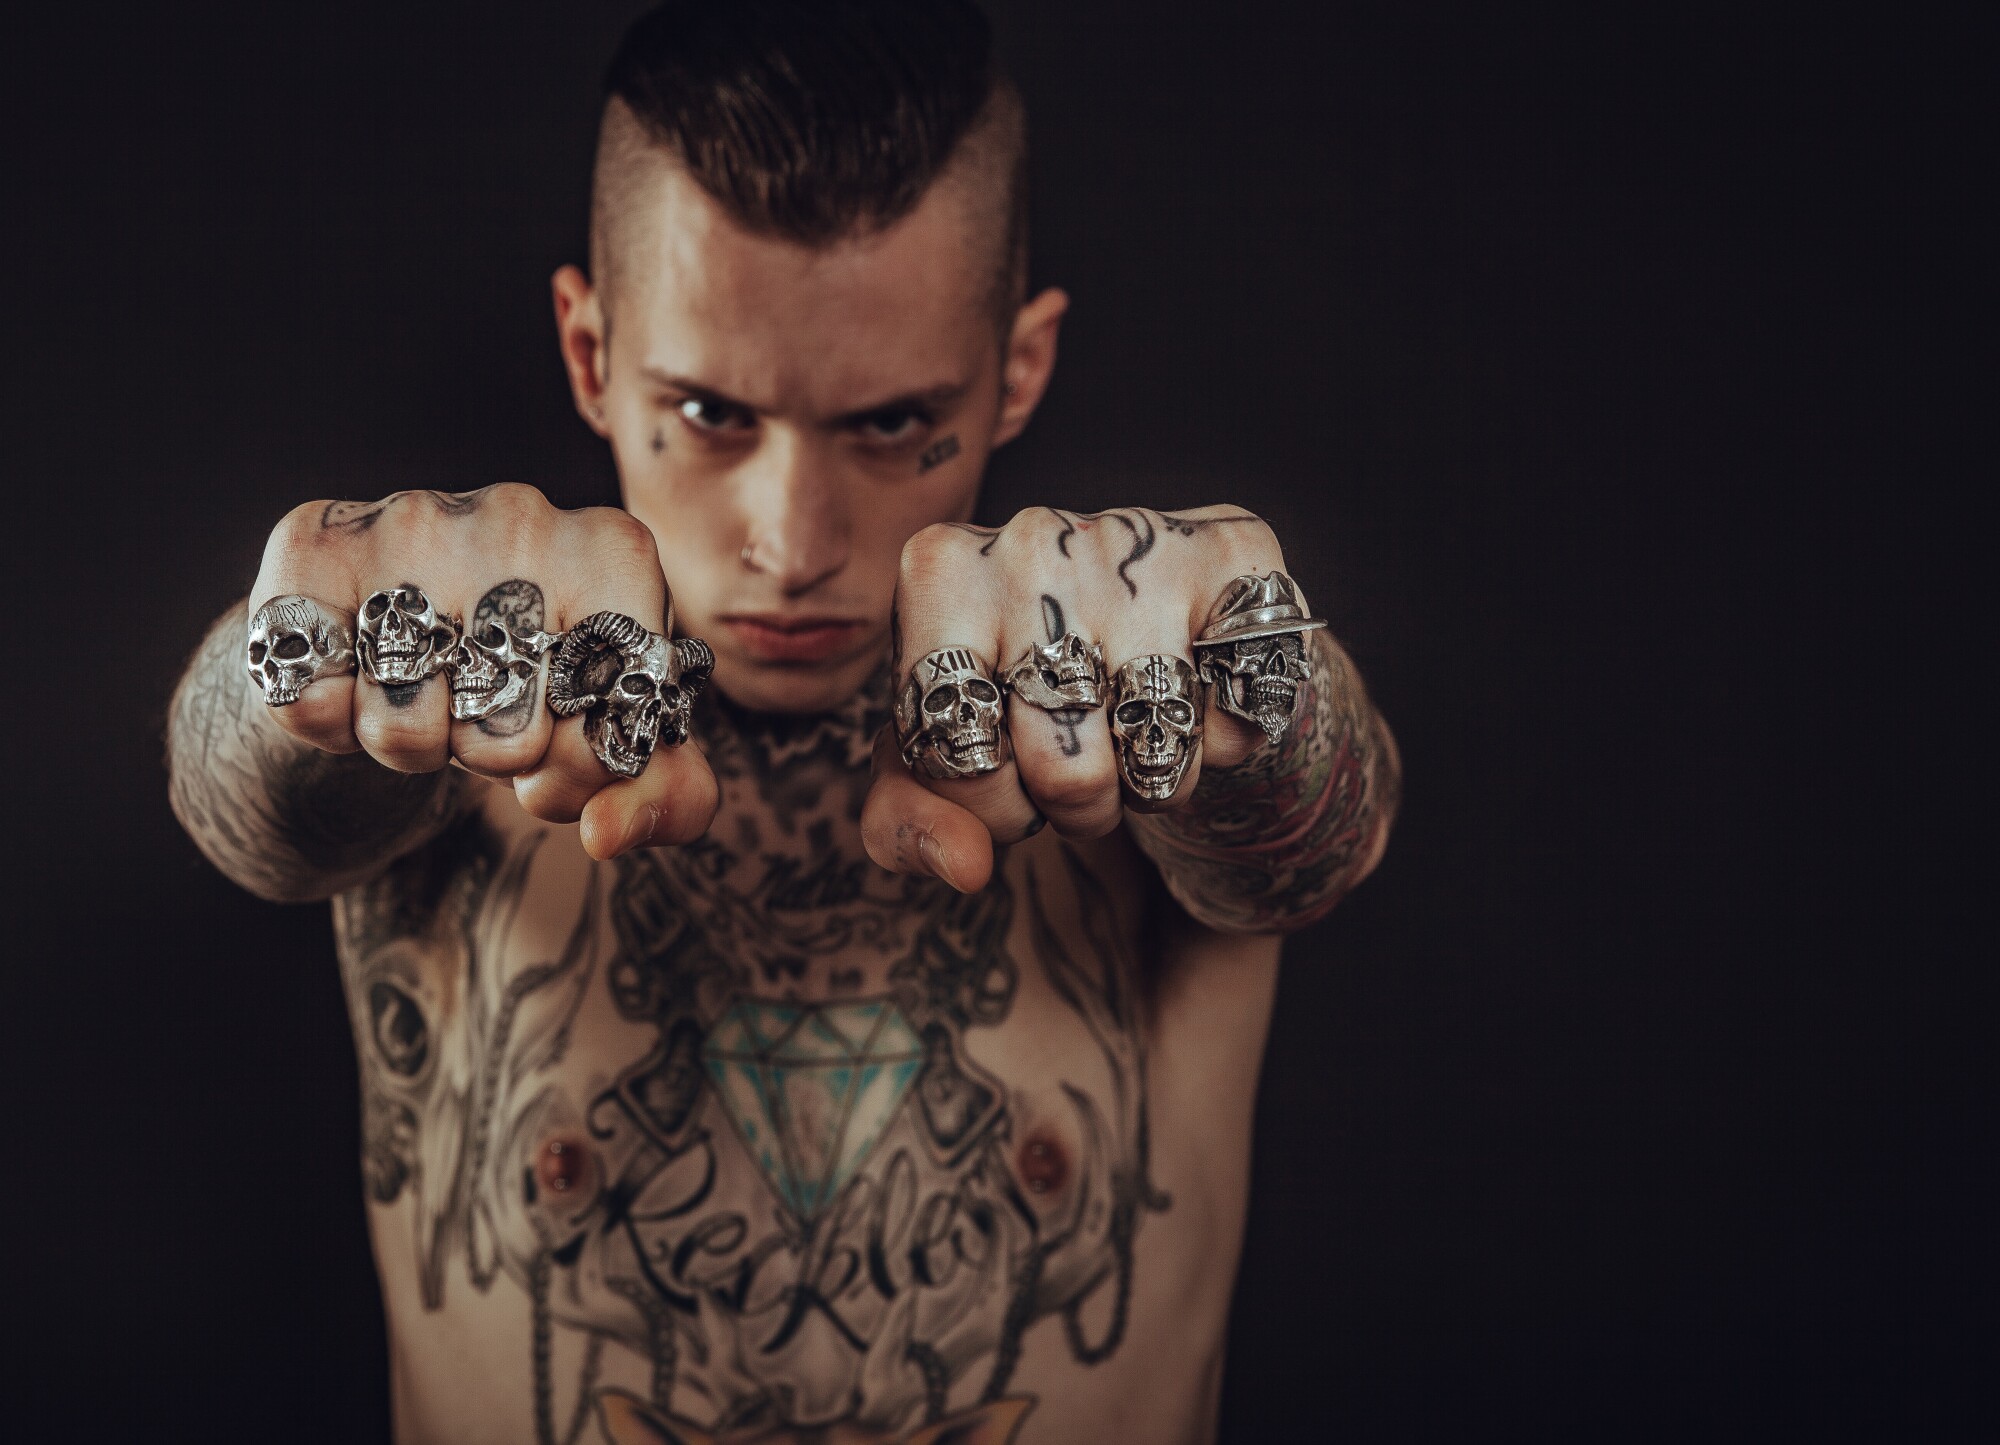 Learn to Tattoo: 12 Tips for Becoming a Tattoo Artist